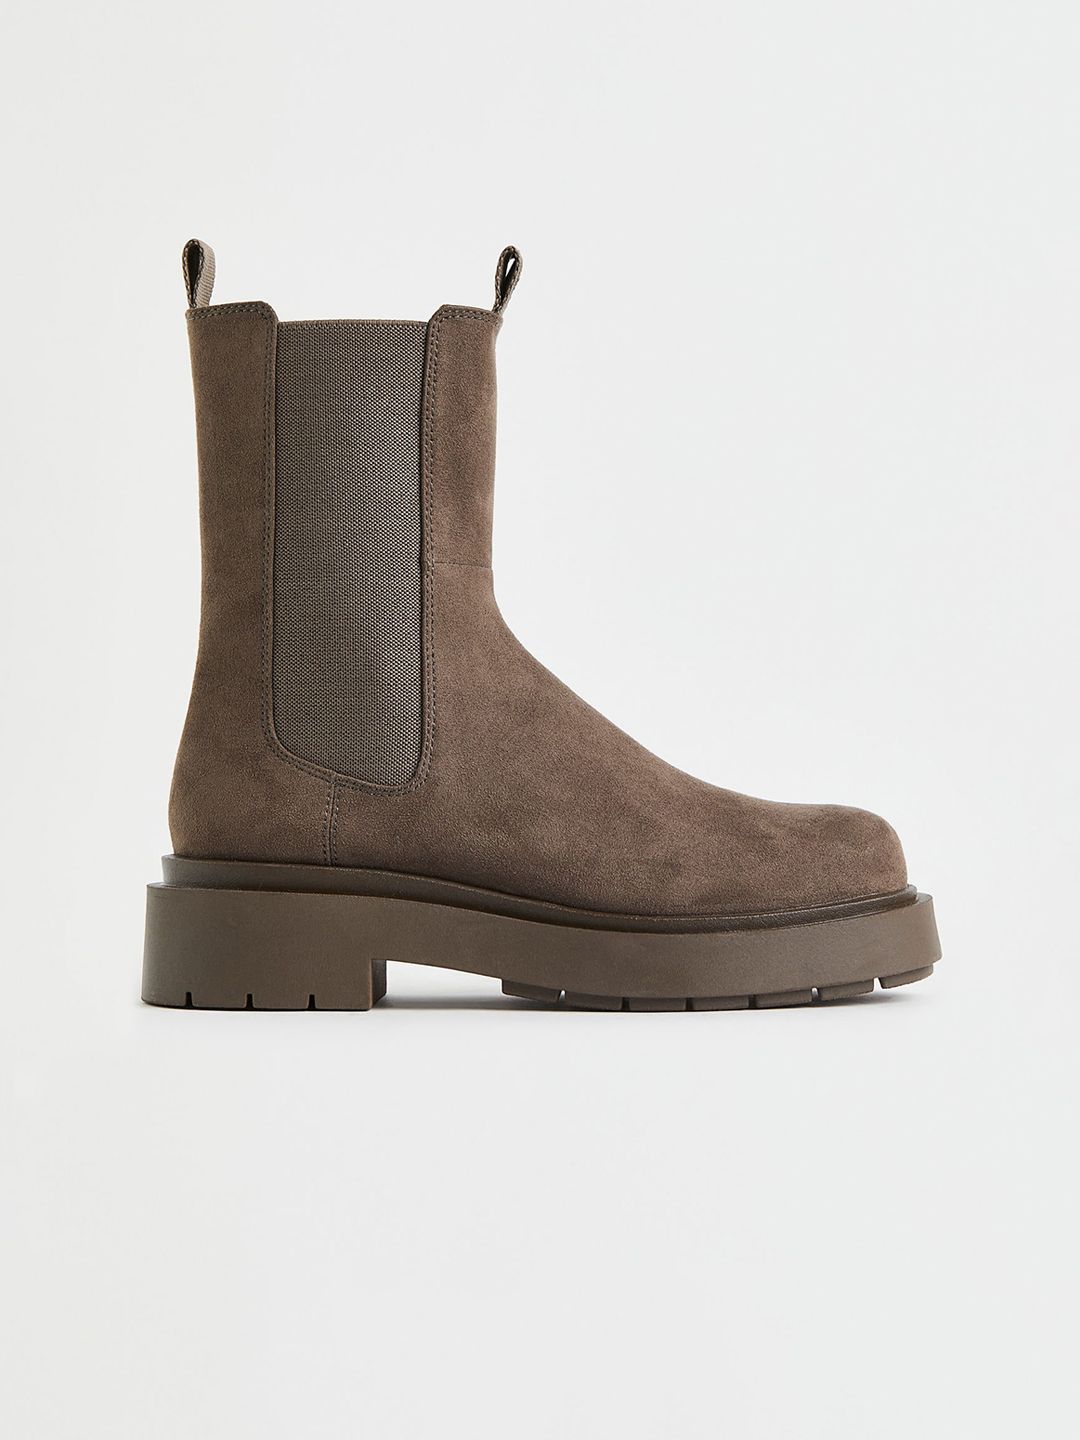 H&M Women Chelsea Boots Price in India